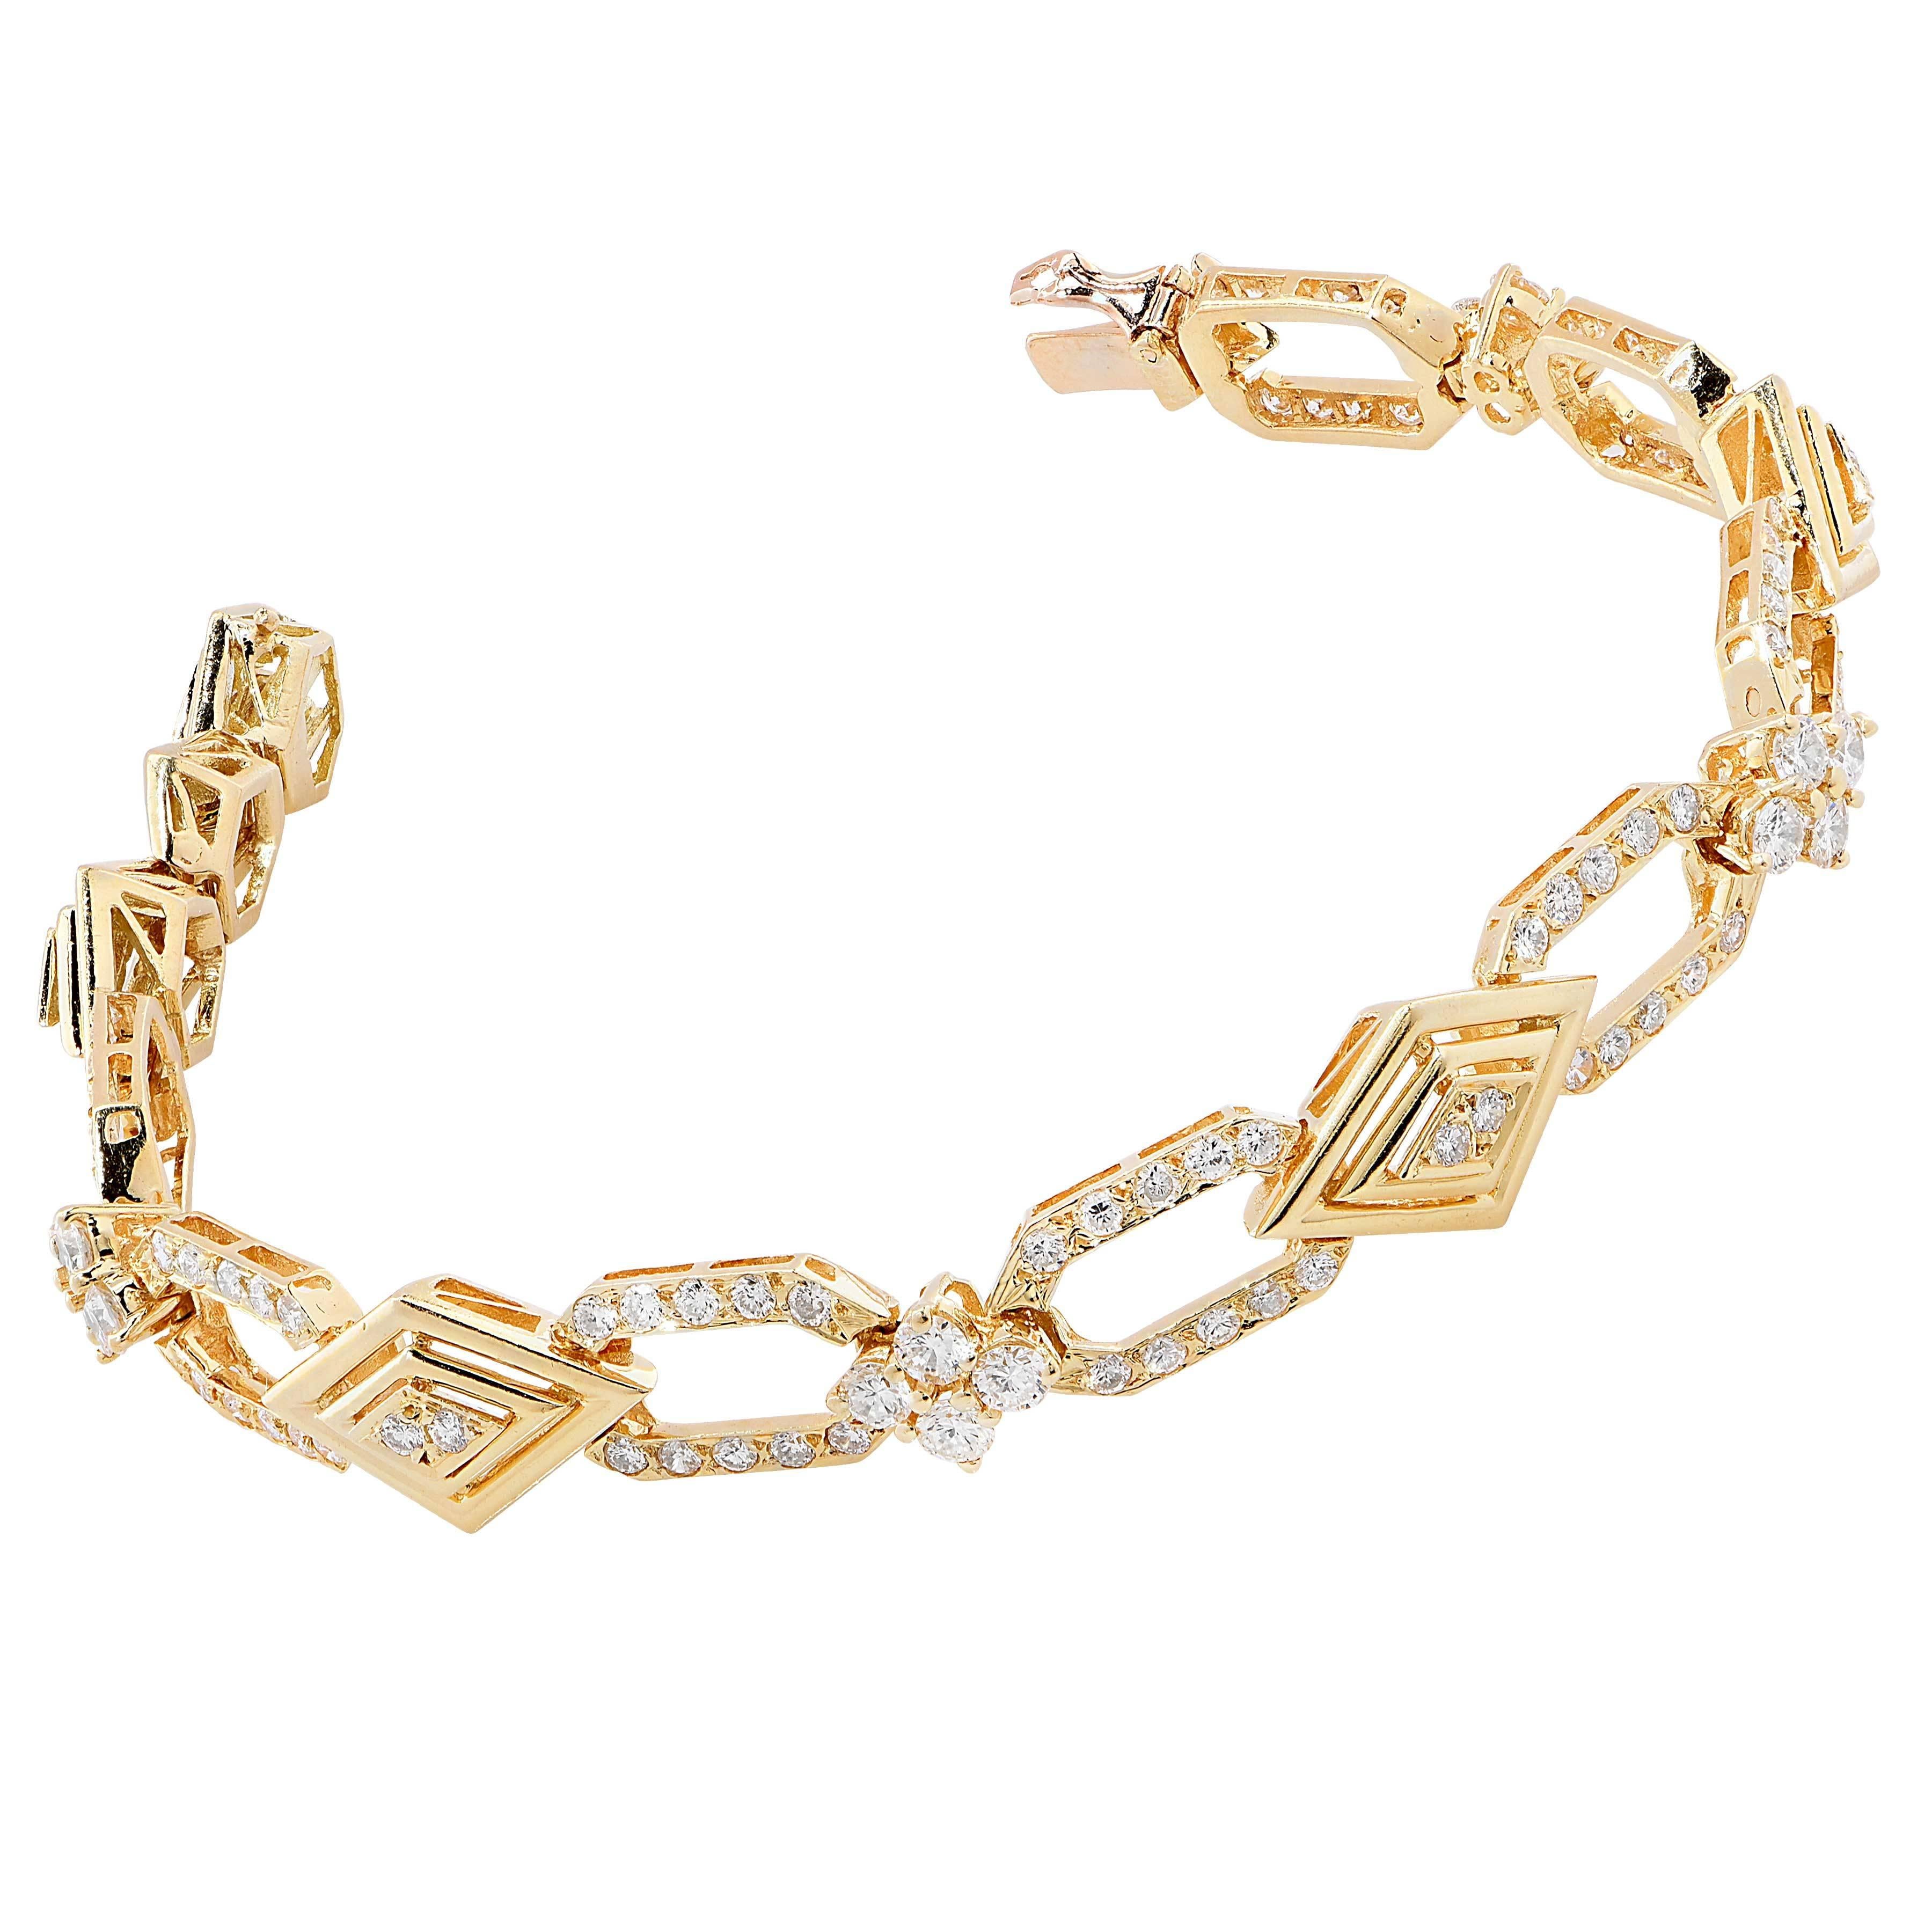 Mecan Elde Suite of Diamond Gold French Jewelry In Excellent Condition For Sale In Bay Harbor Islands, FL